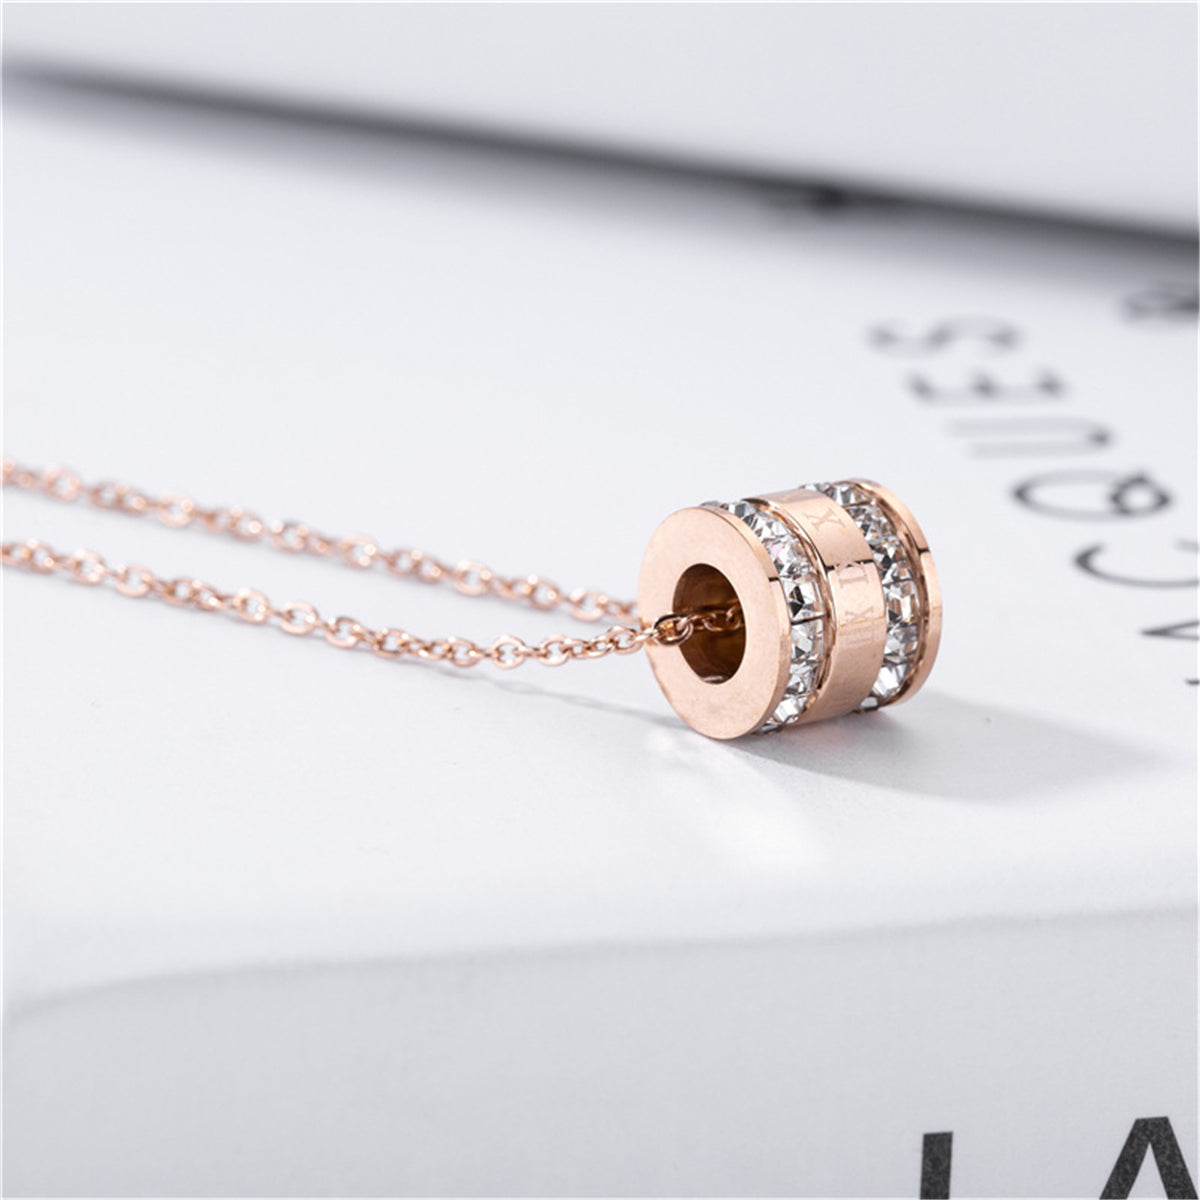 Crystal & 18K Rose Gold-Plated Roman Numeral Pendant Necklace